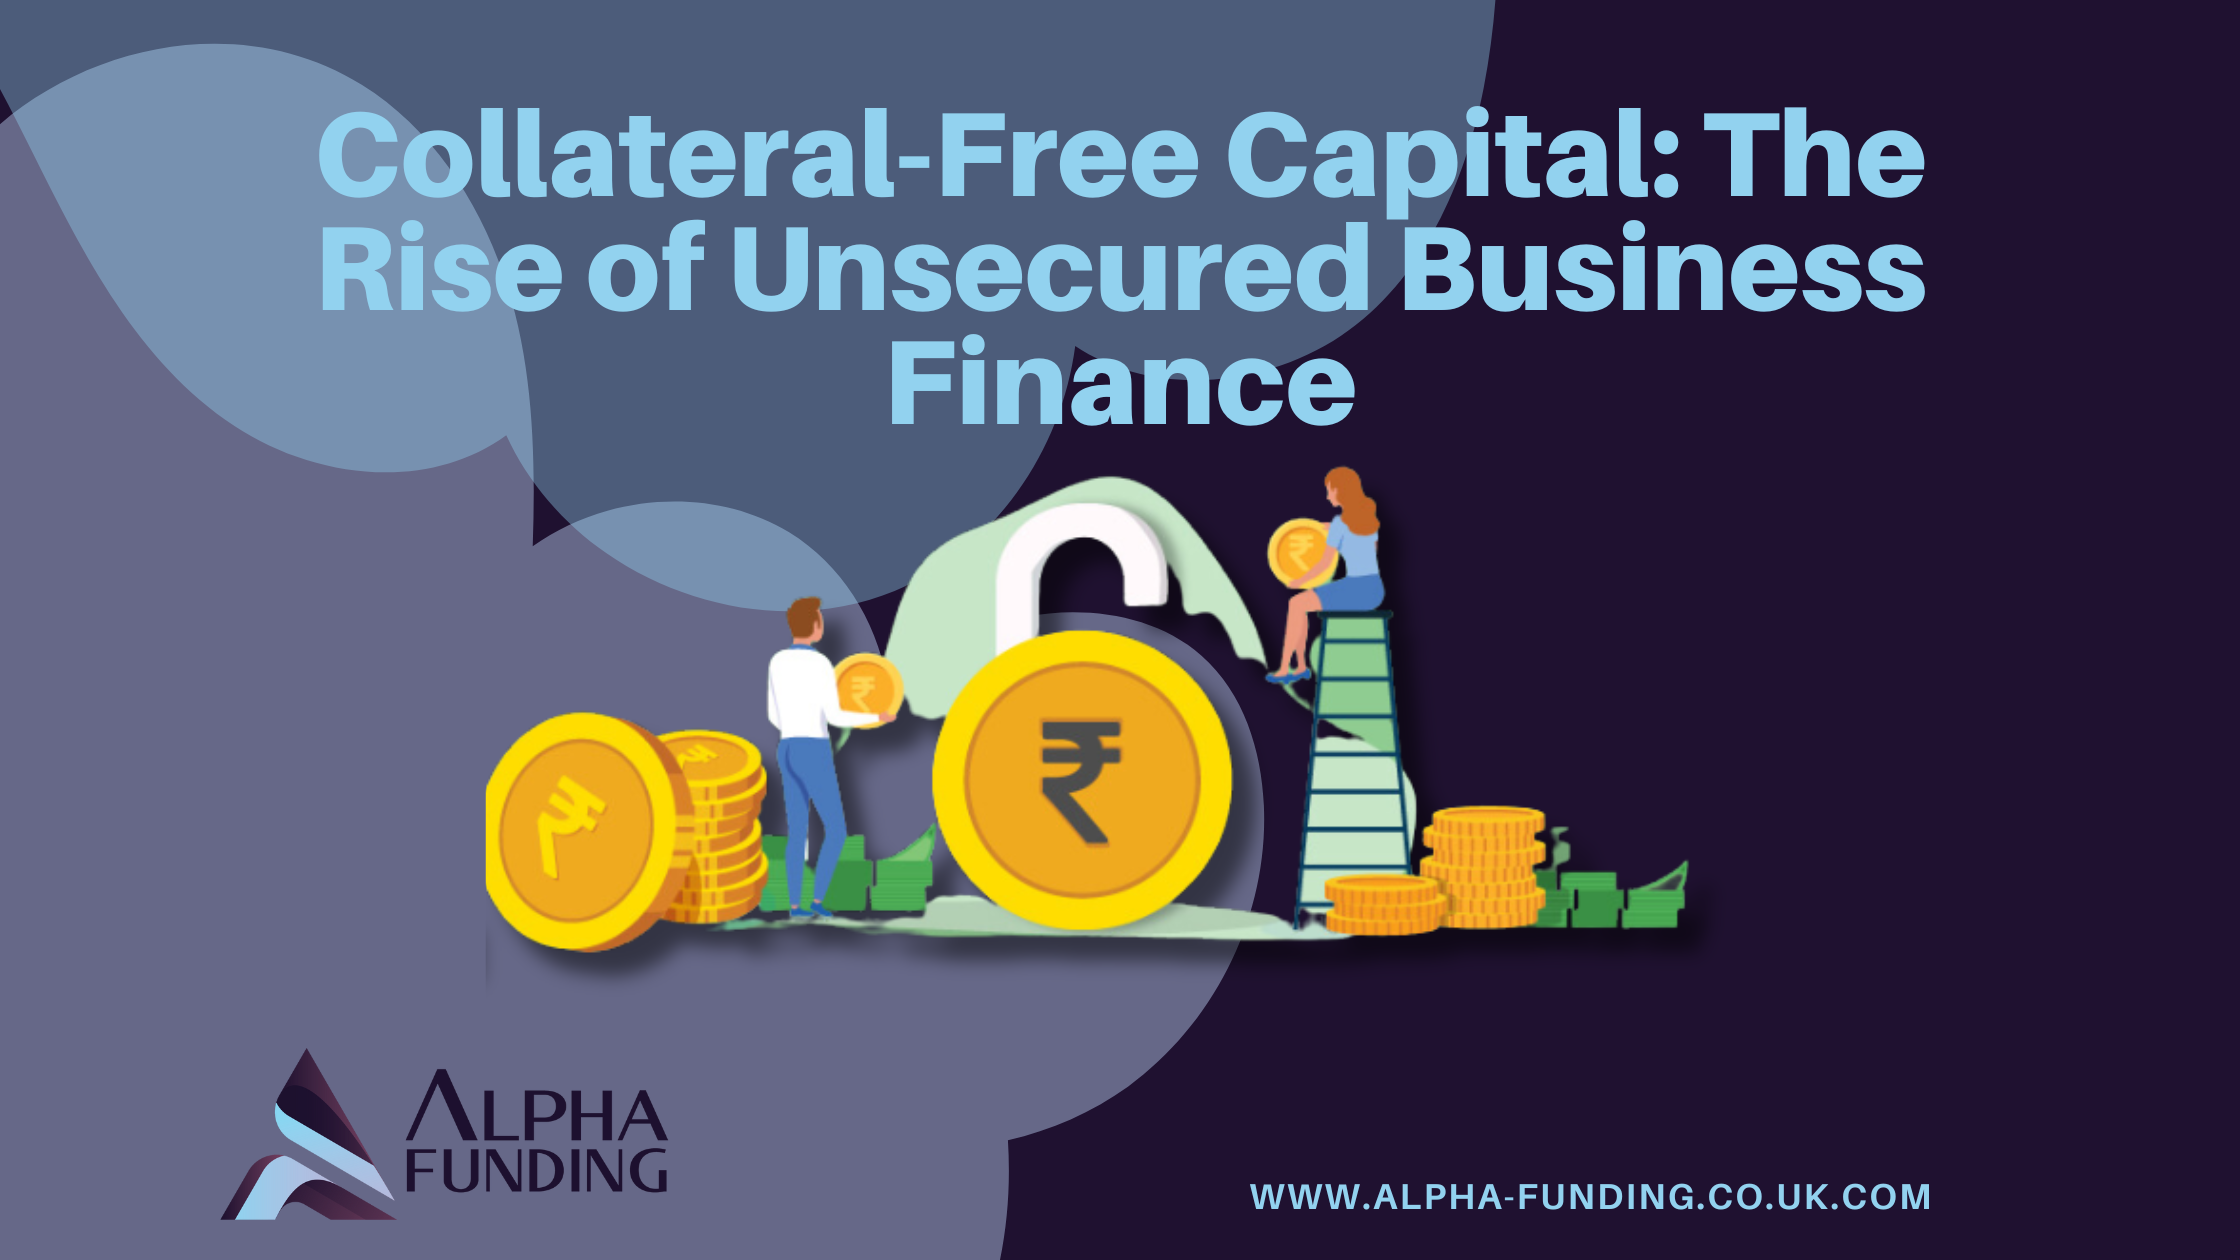 Unsecured Business Finance